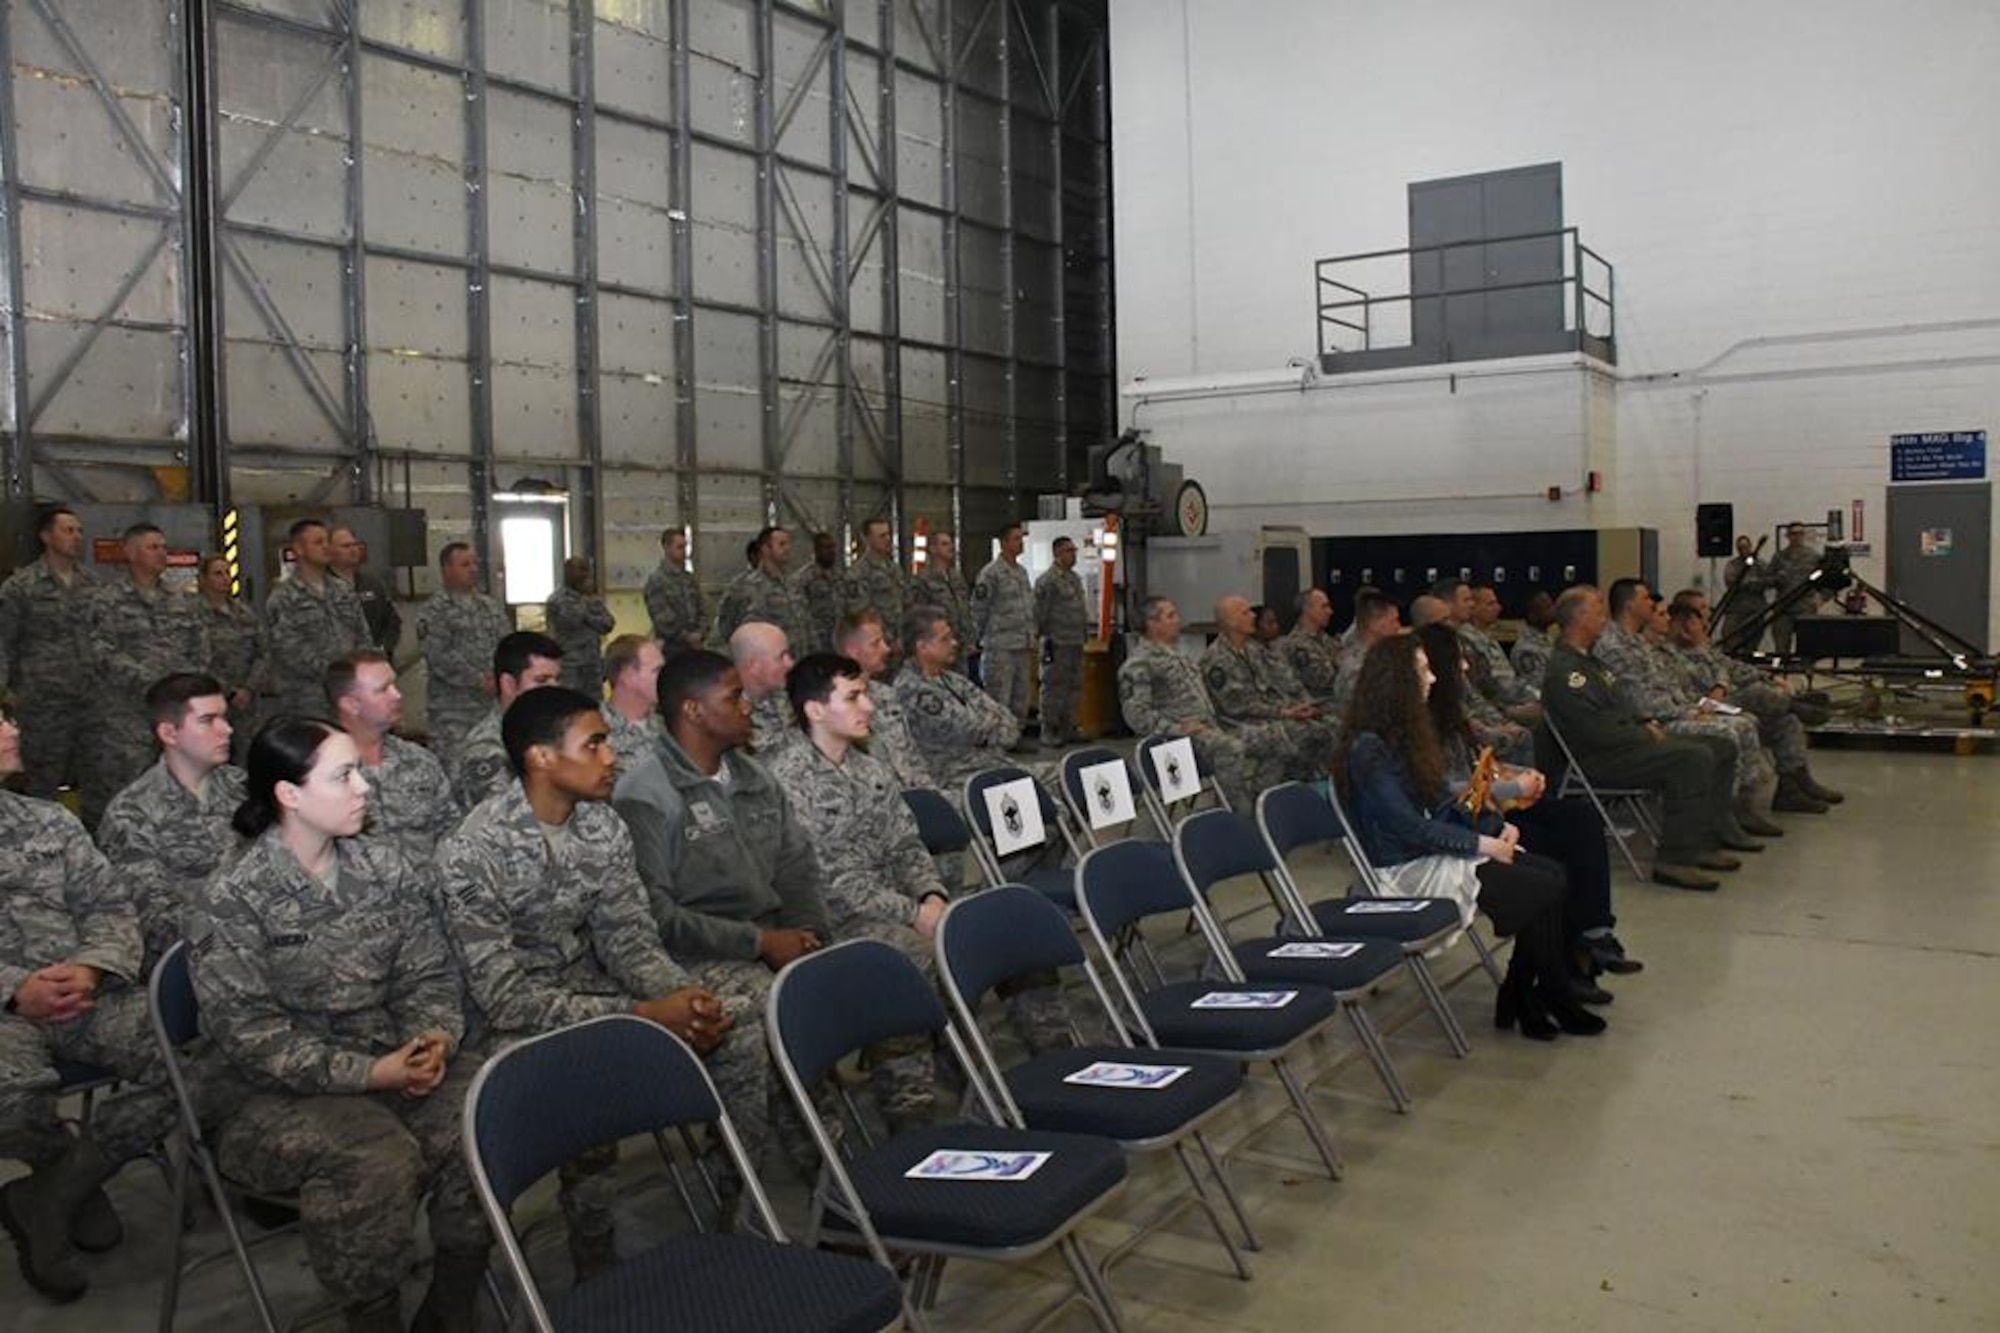 The attendees of Chief Master Sgt. Glen F. Saunders Jr., quality assurance superintendent with the 94th Maintenance Group promotion ceremony. They listen intently as Saunders gives remarks to civilian and military members March, 5, 2017 at Dobbins Air Reserve Base, Georgia. (U.S. Air Force photo/Airman 1st Class Justin Clayvon) 